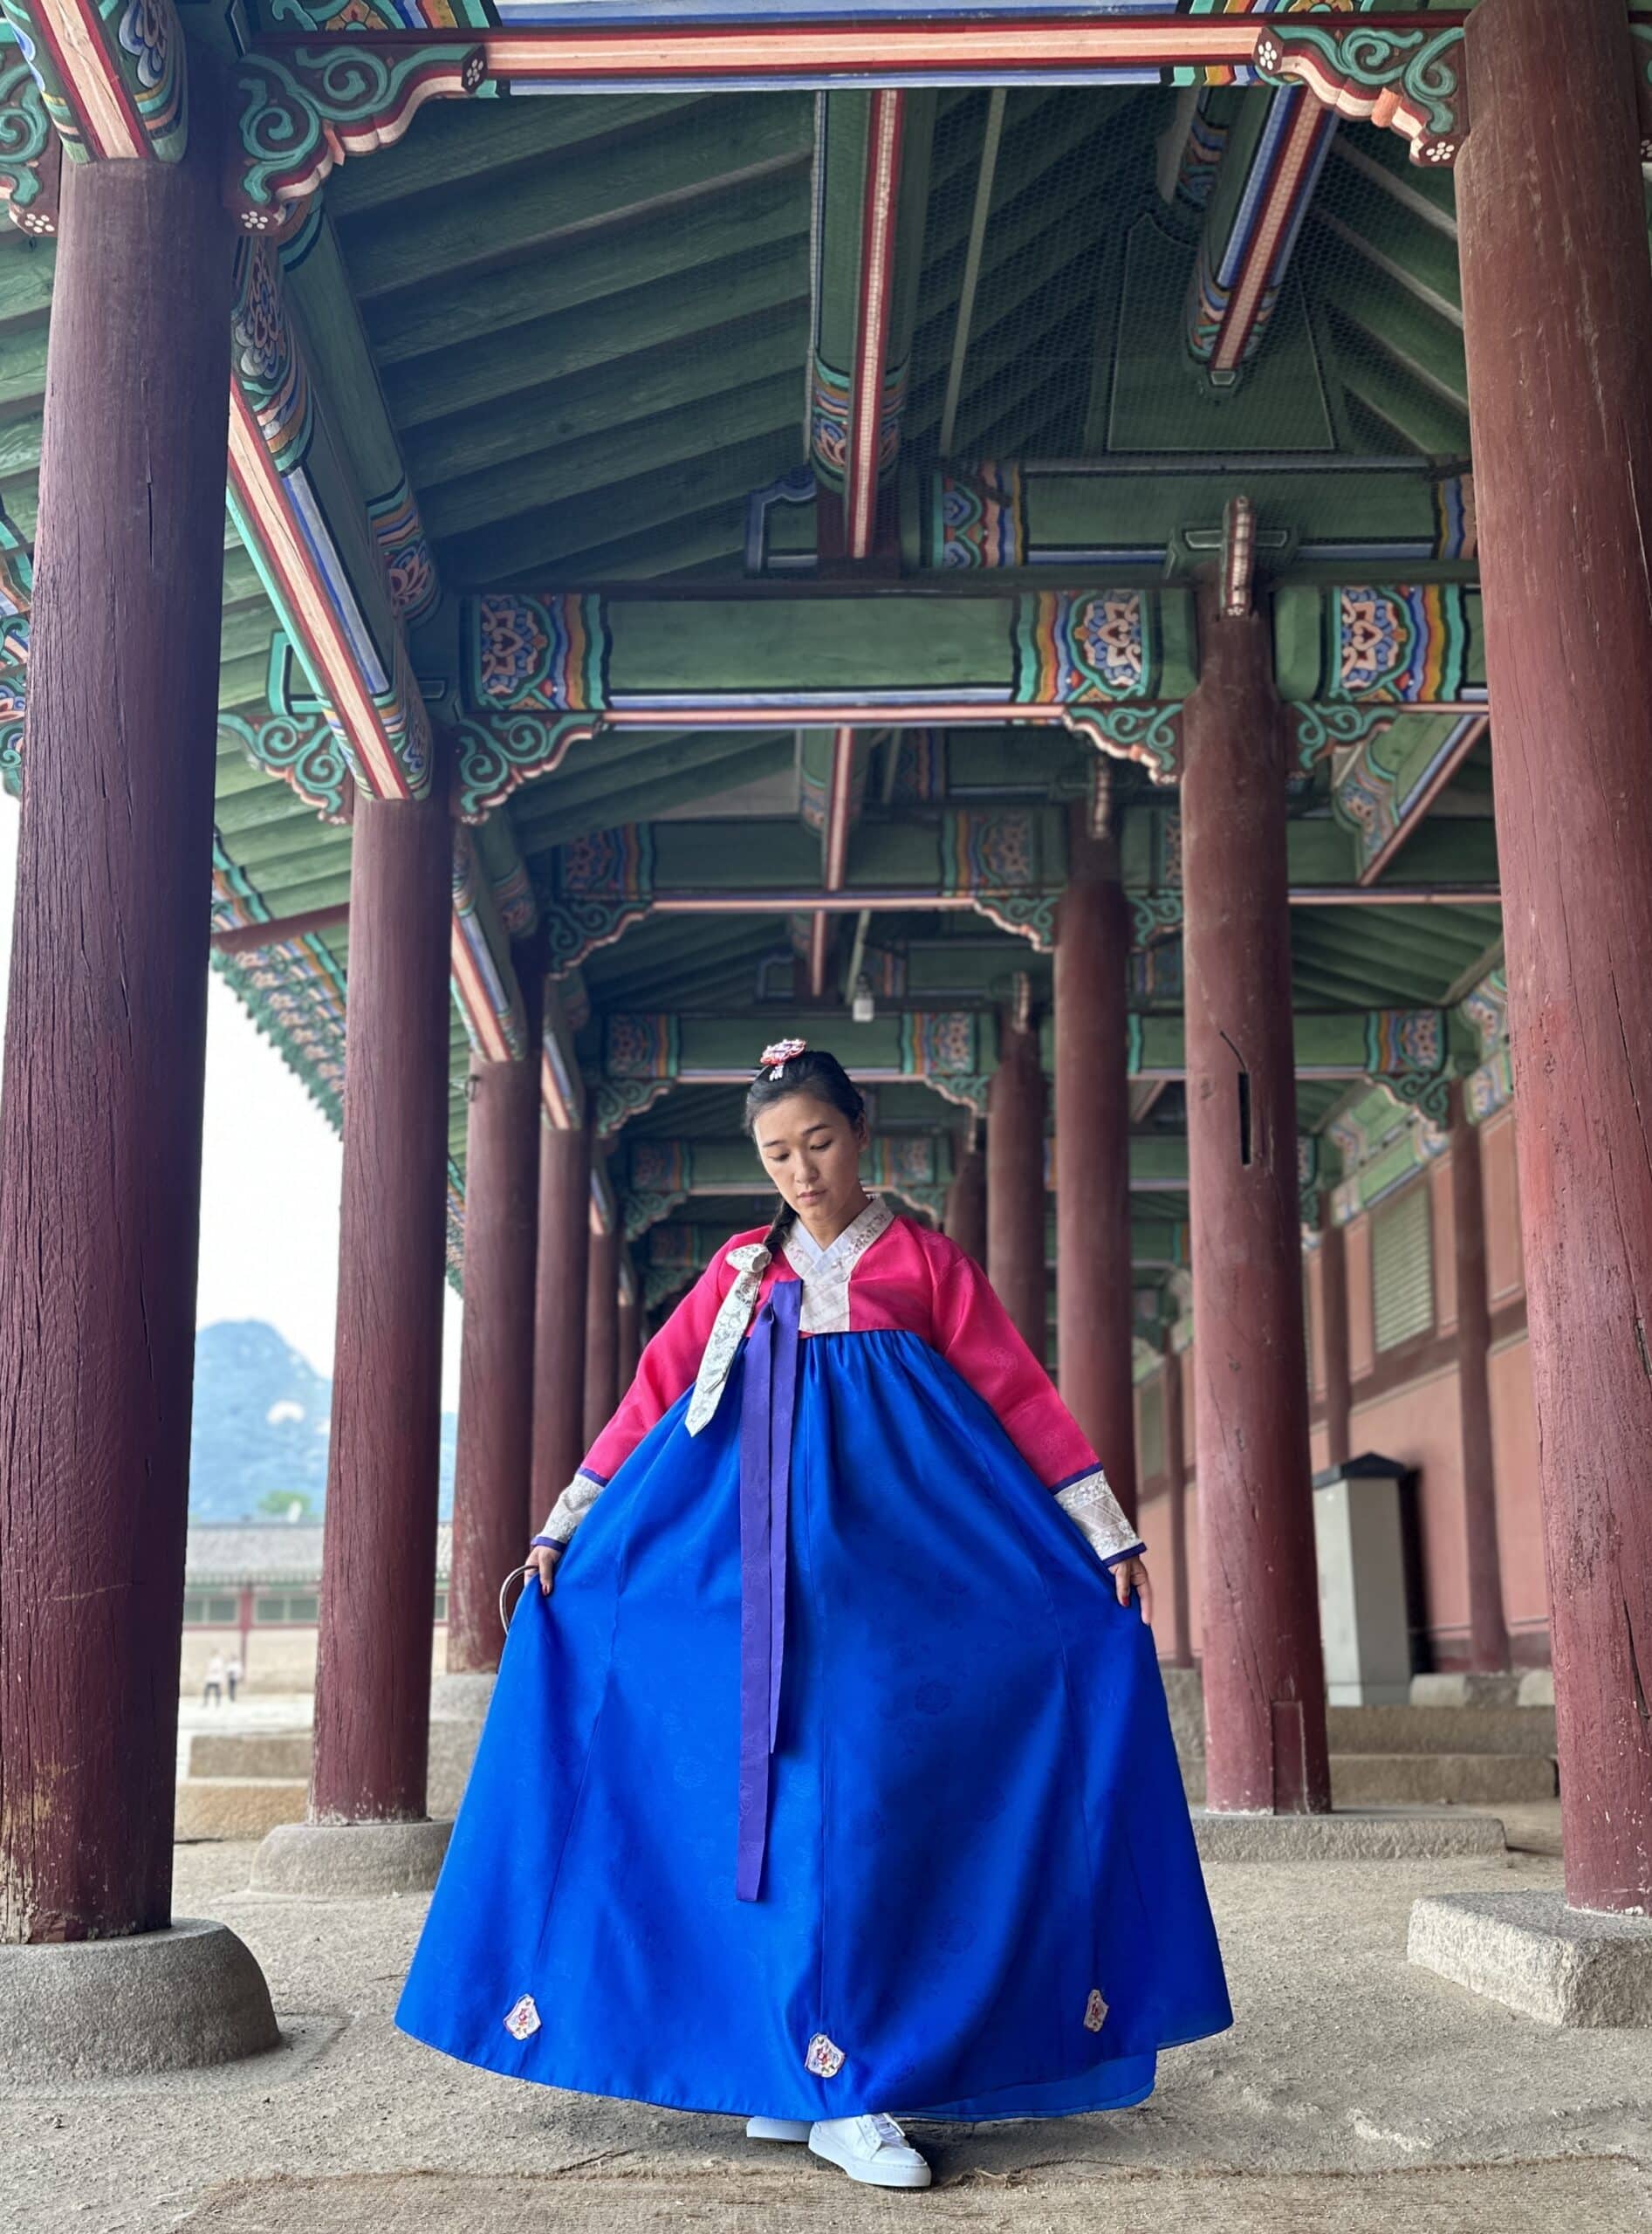 Liz is standing in the outdoor hallway of Gyeongbokgung Palace decorated with traditional minhwa paintings. She is wearing a blue, pink, and purple hanbok with her hair pulled to the side in a braid. 